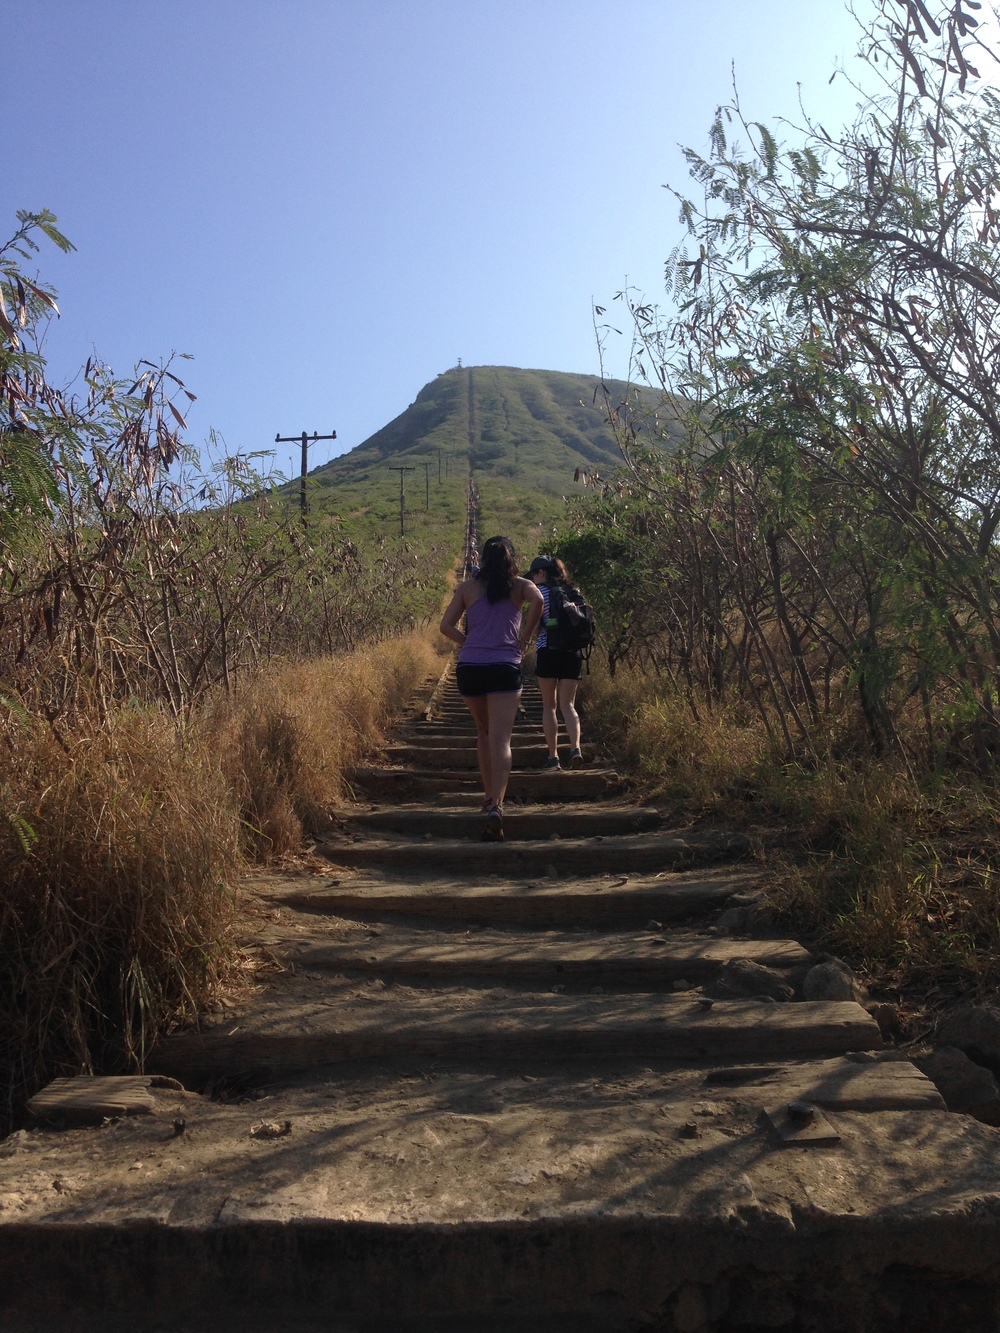 One of our hardest hikes, the Koko Crater Trail. You can see the stairs all the way up.